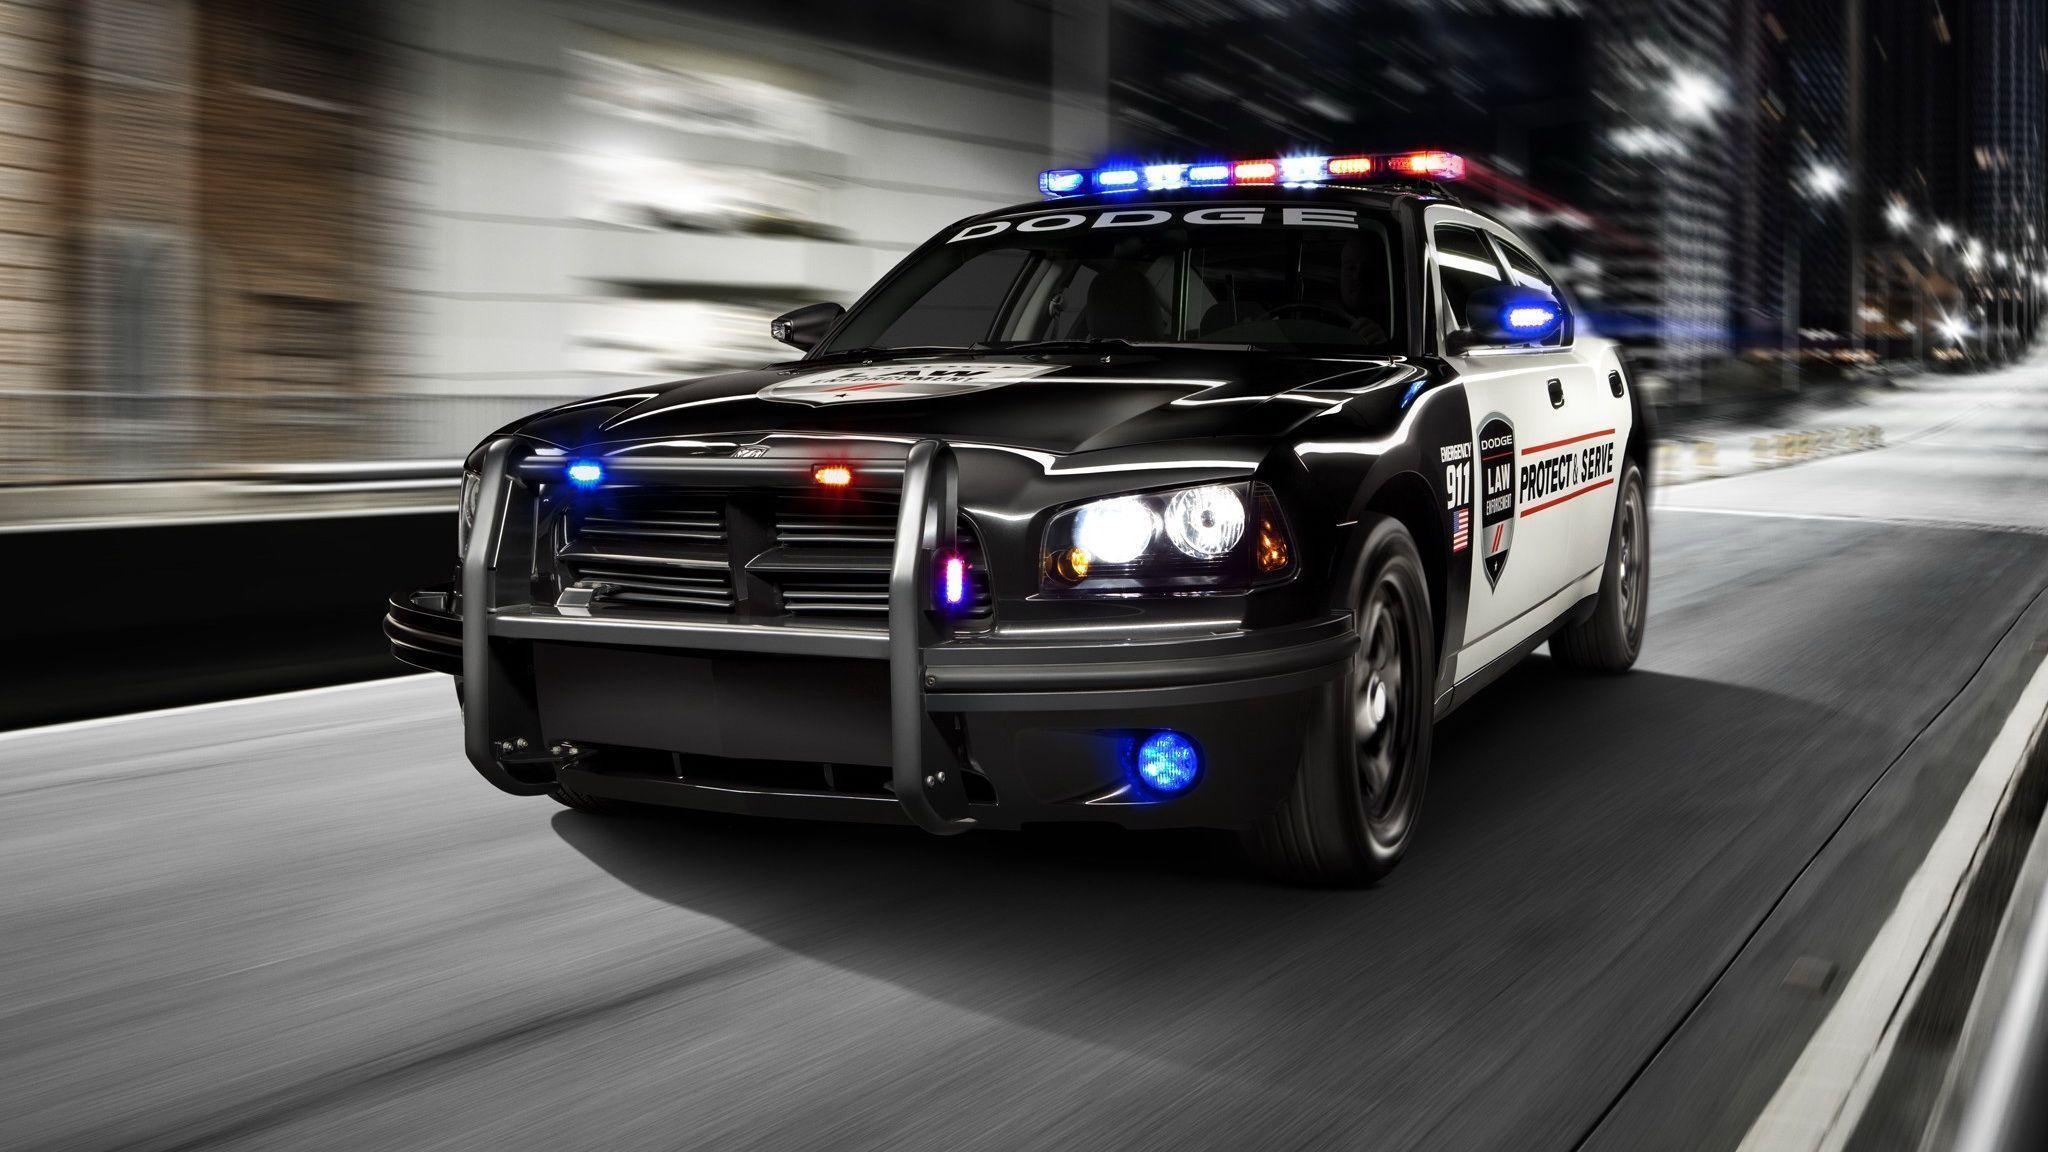 Dodge Charger Police Vehicle 2006 Image